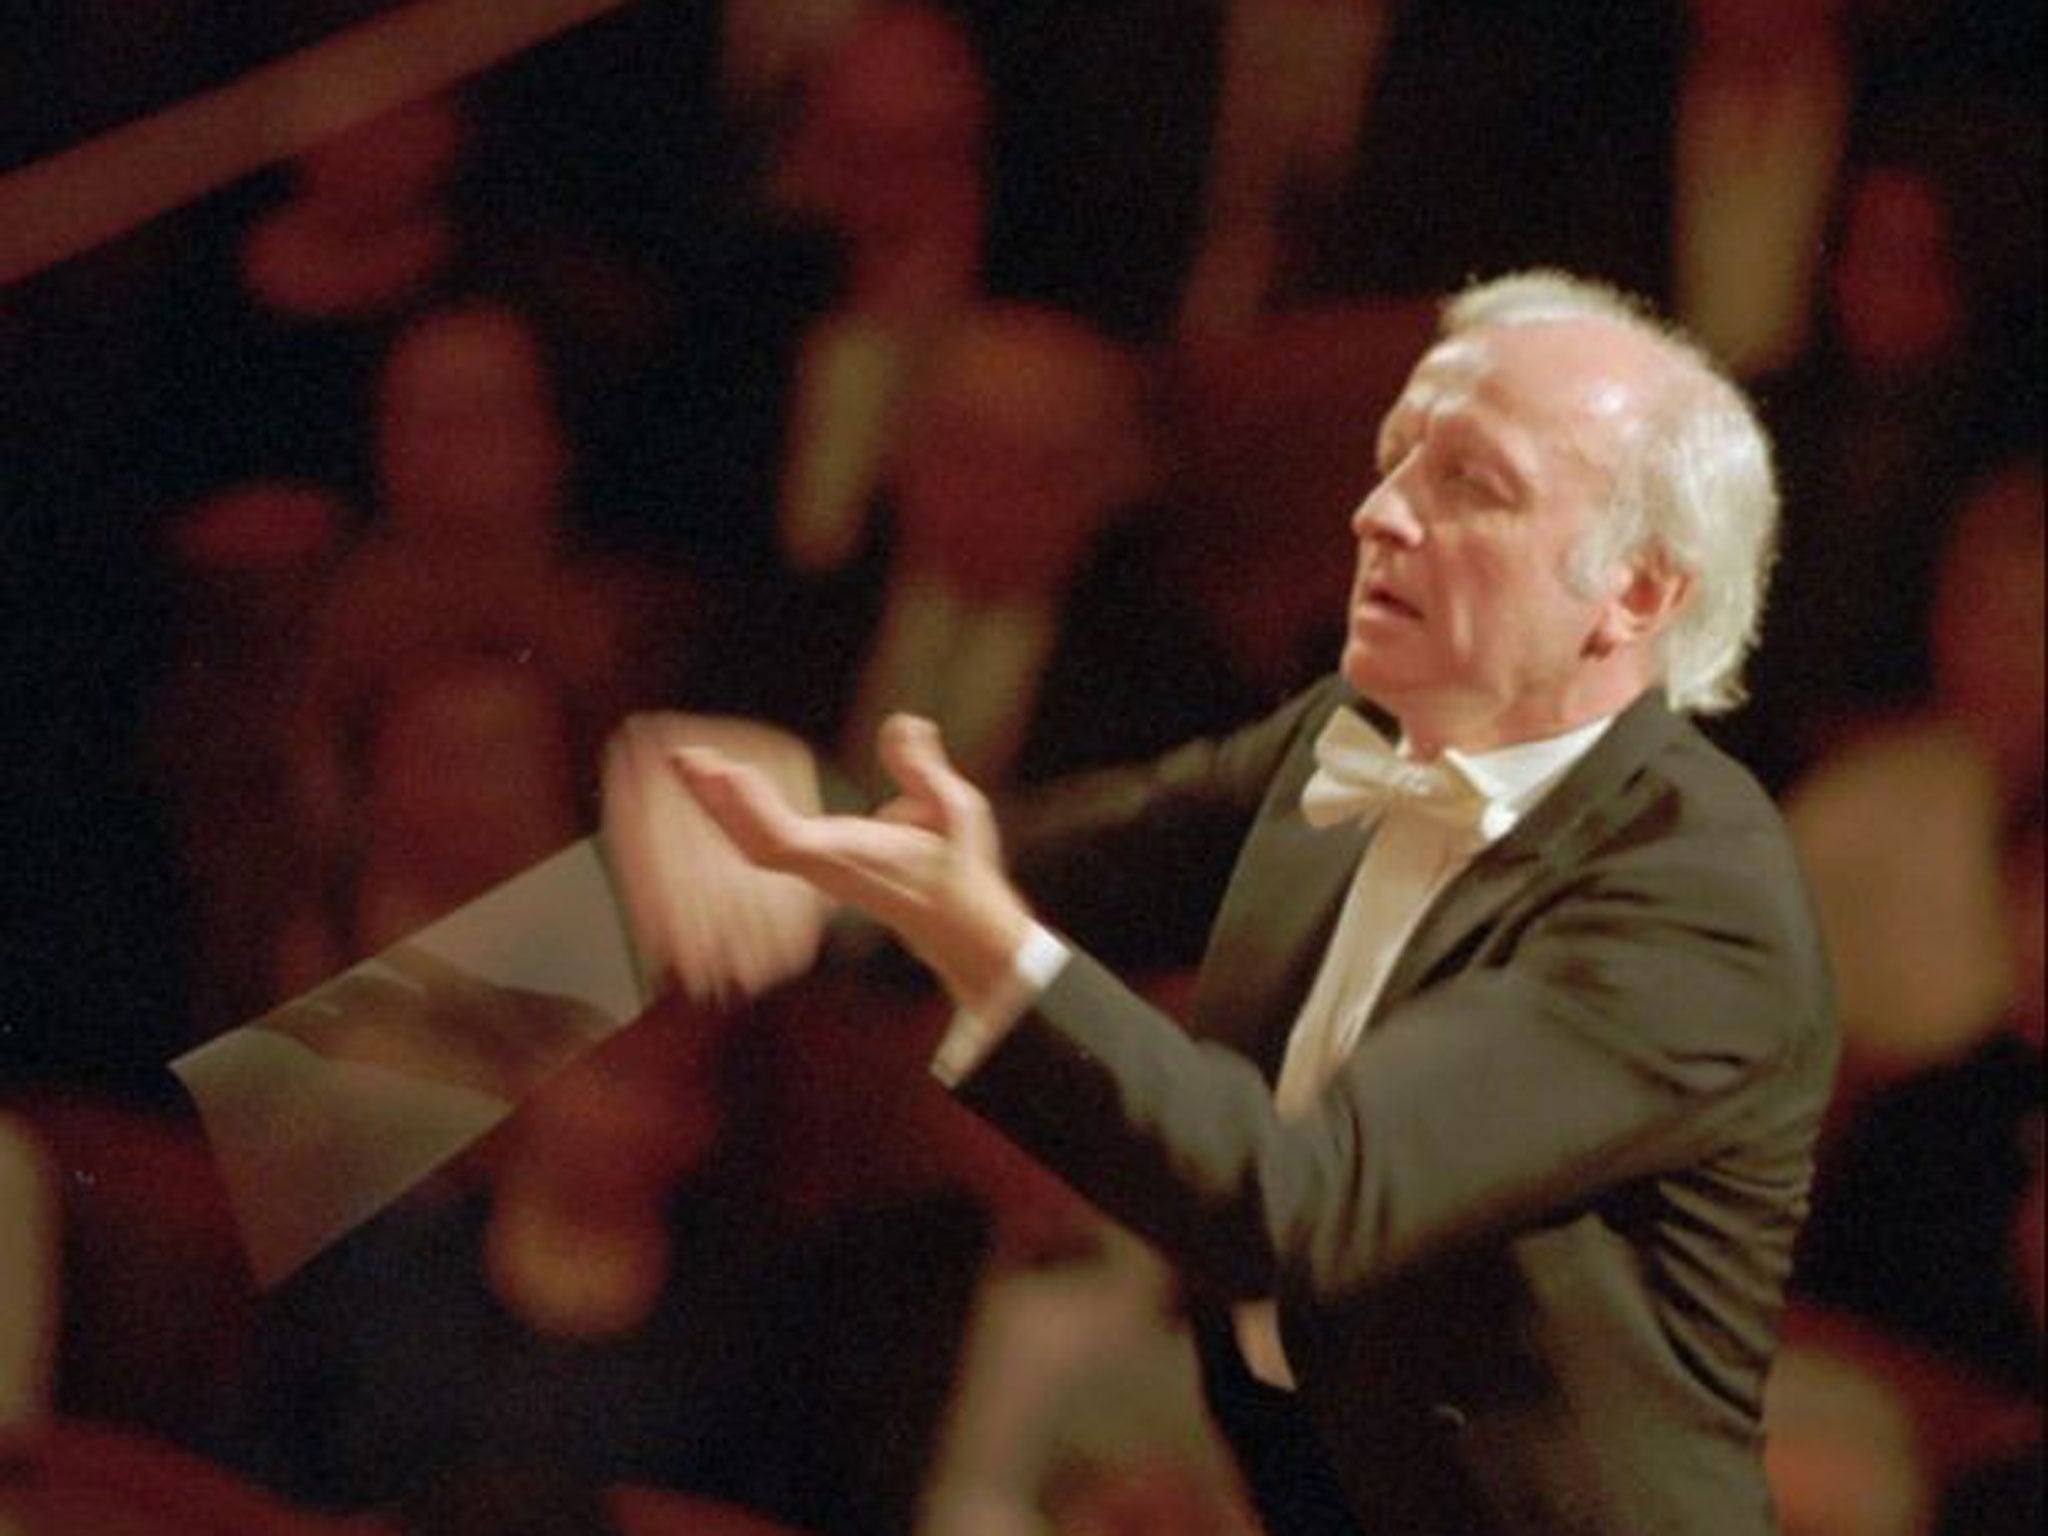 The then chief conductor of Czech Philharmony Orchestra Gerd Albrecht performs during the concert held in Prague in 1996